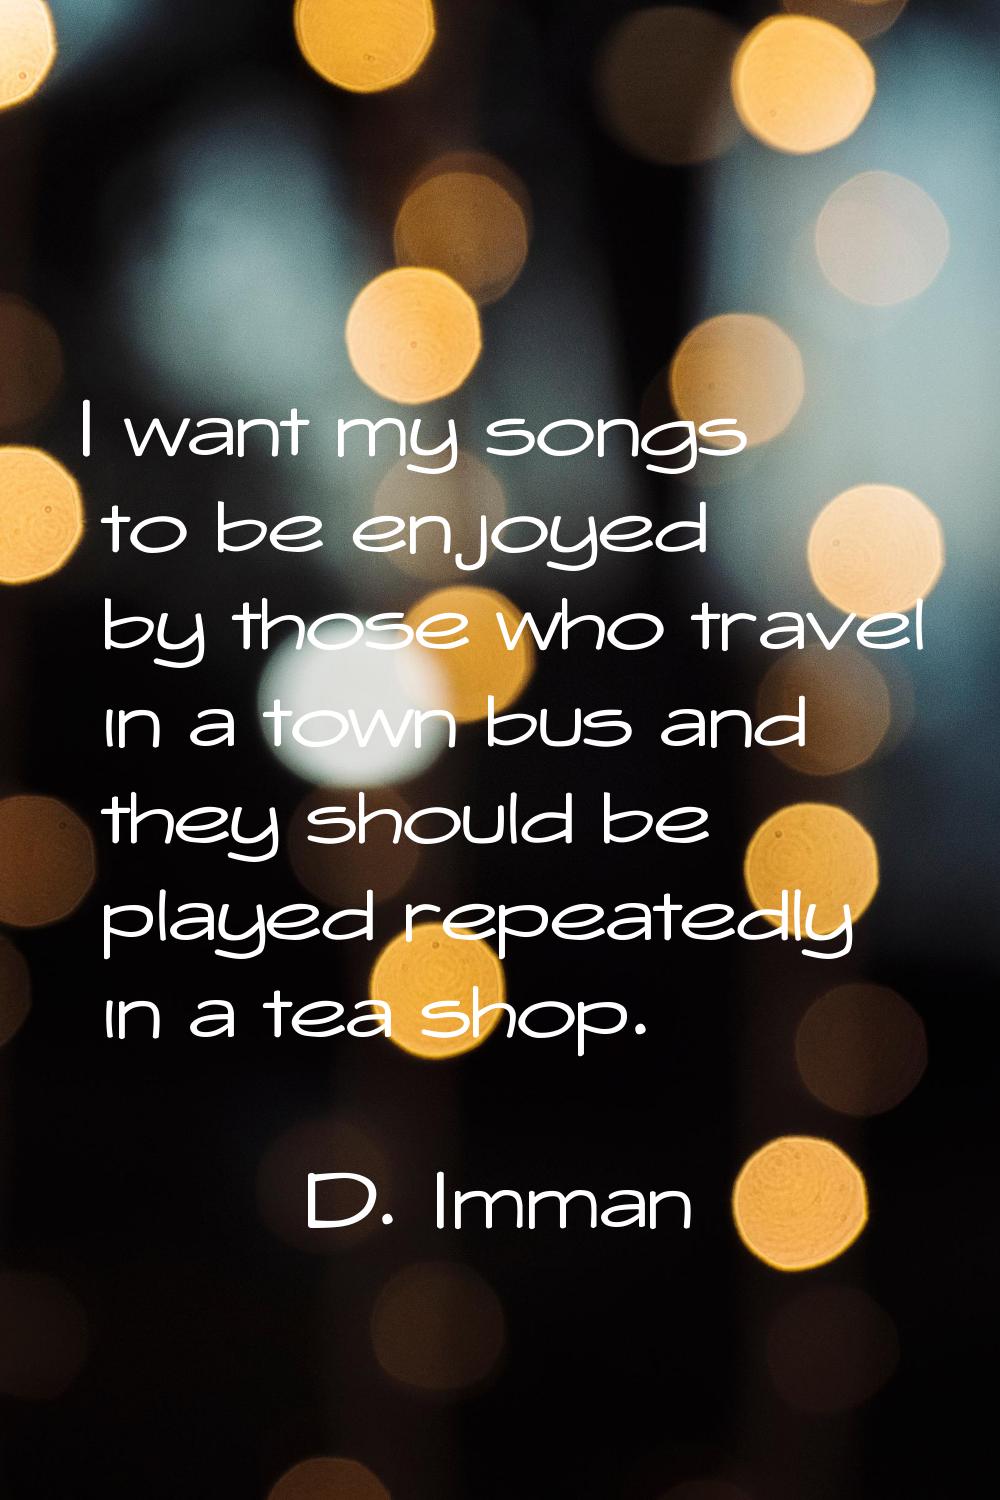 I want my songs to be enjoyed by those who travel in a town bus and they should be played repeatedl